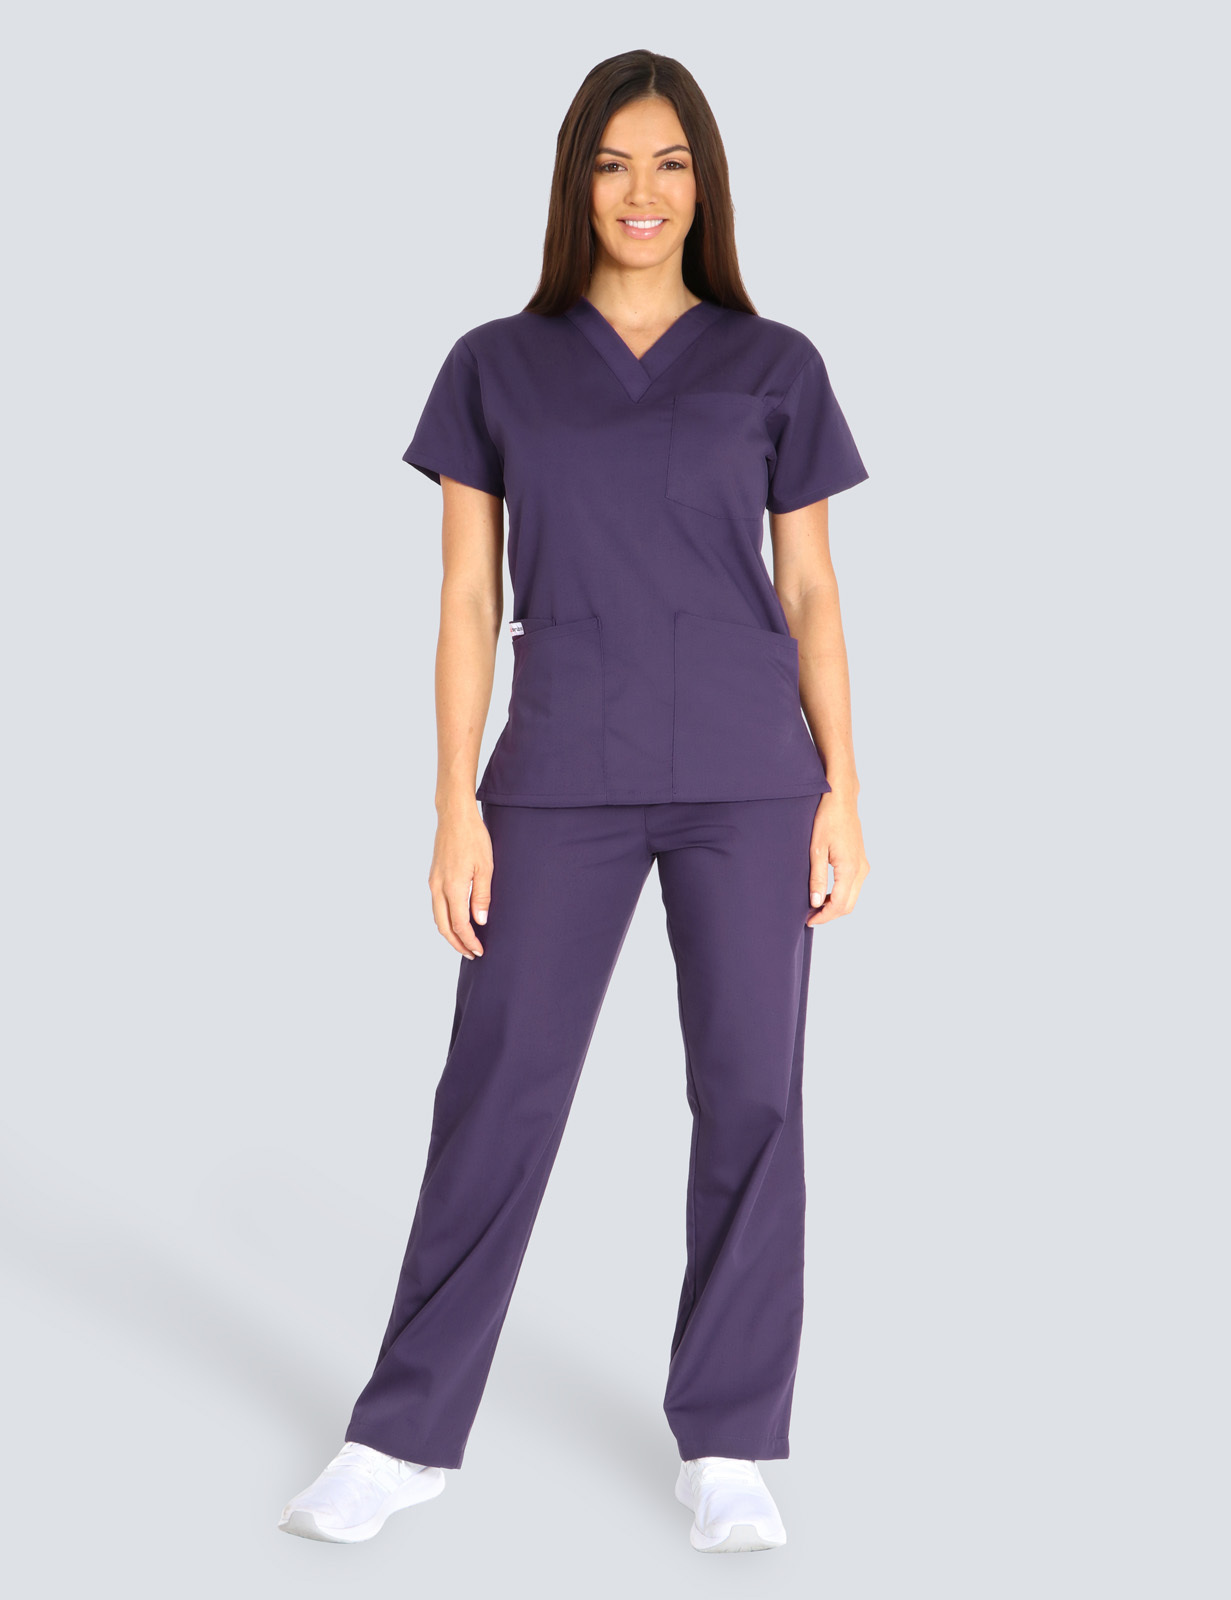 Caboolture Hospital - ED AIN (4 Pocket Scrub Top and Cargo Pants in Aubergine incl Logos)